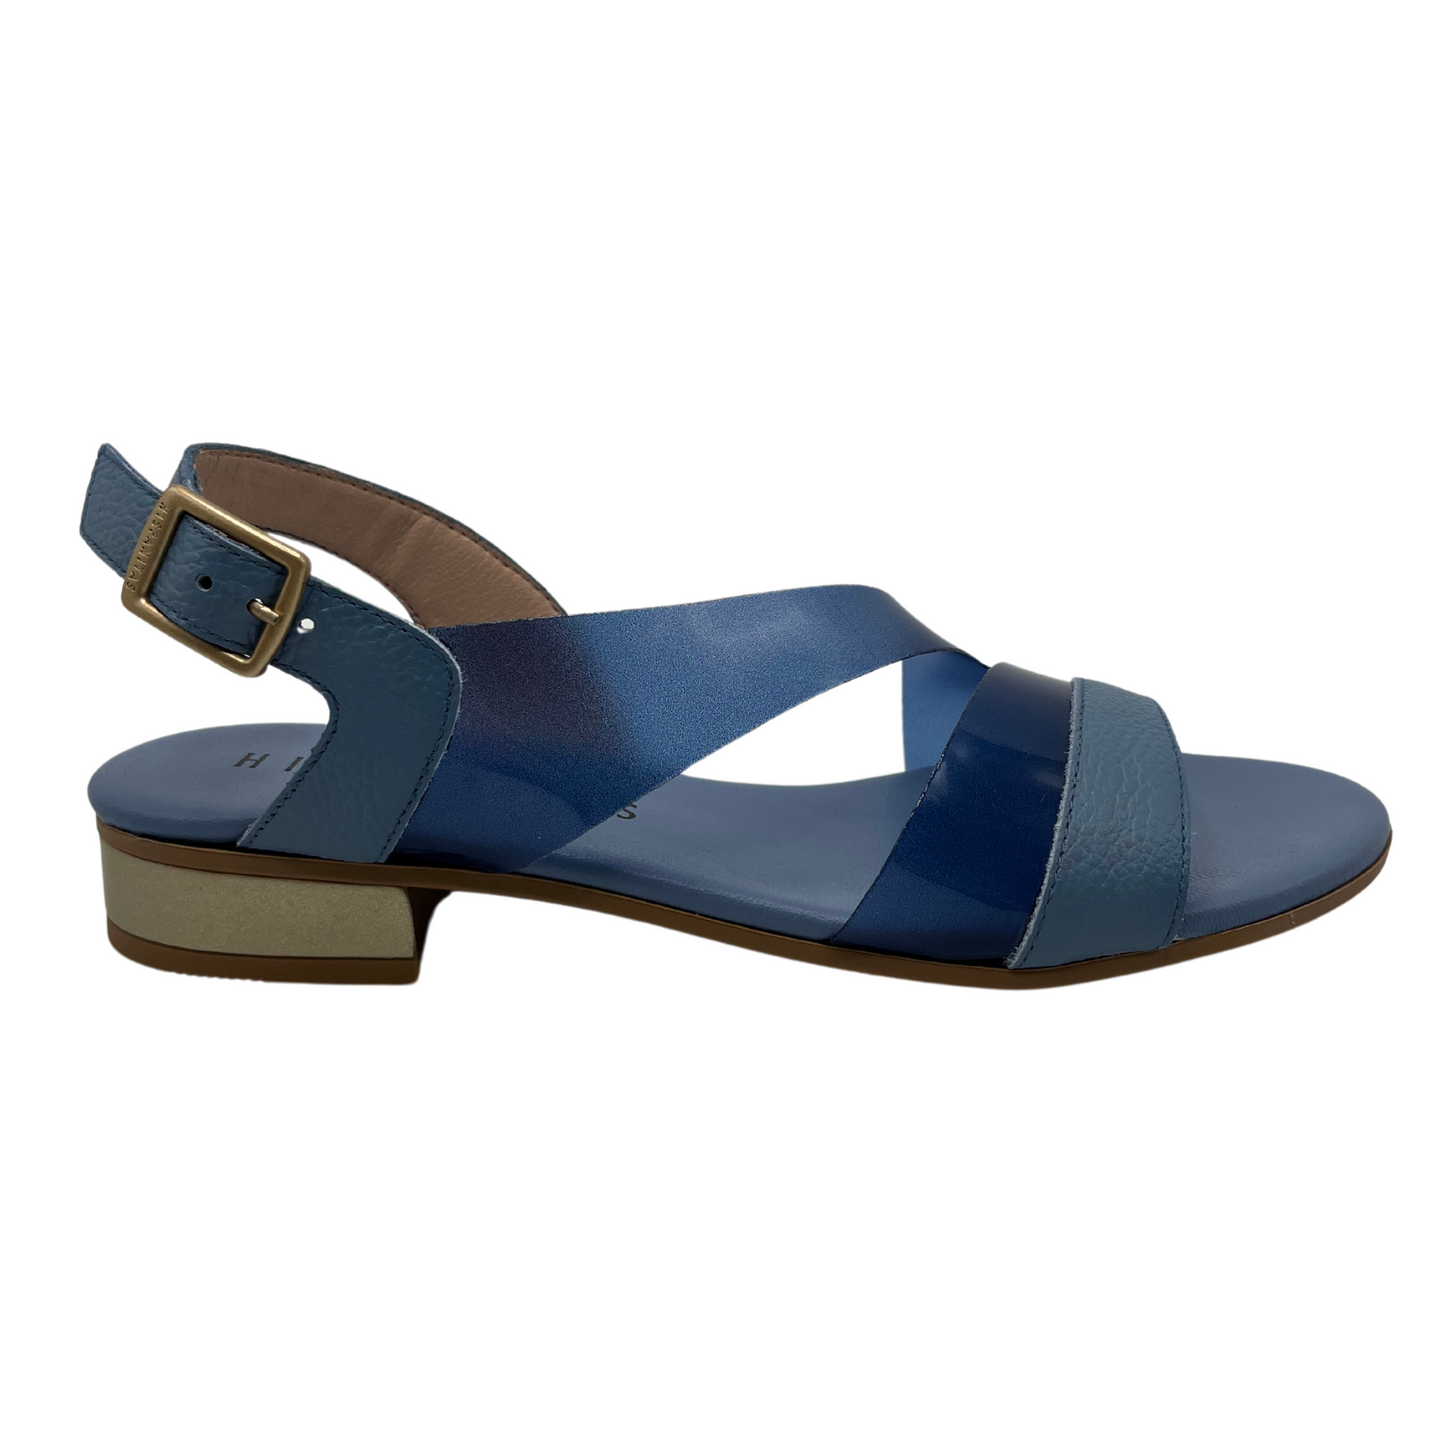 Right facing view of blue leather and vinyl sandal with buckle strap and low heel